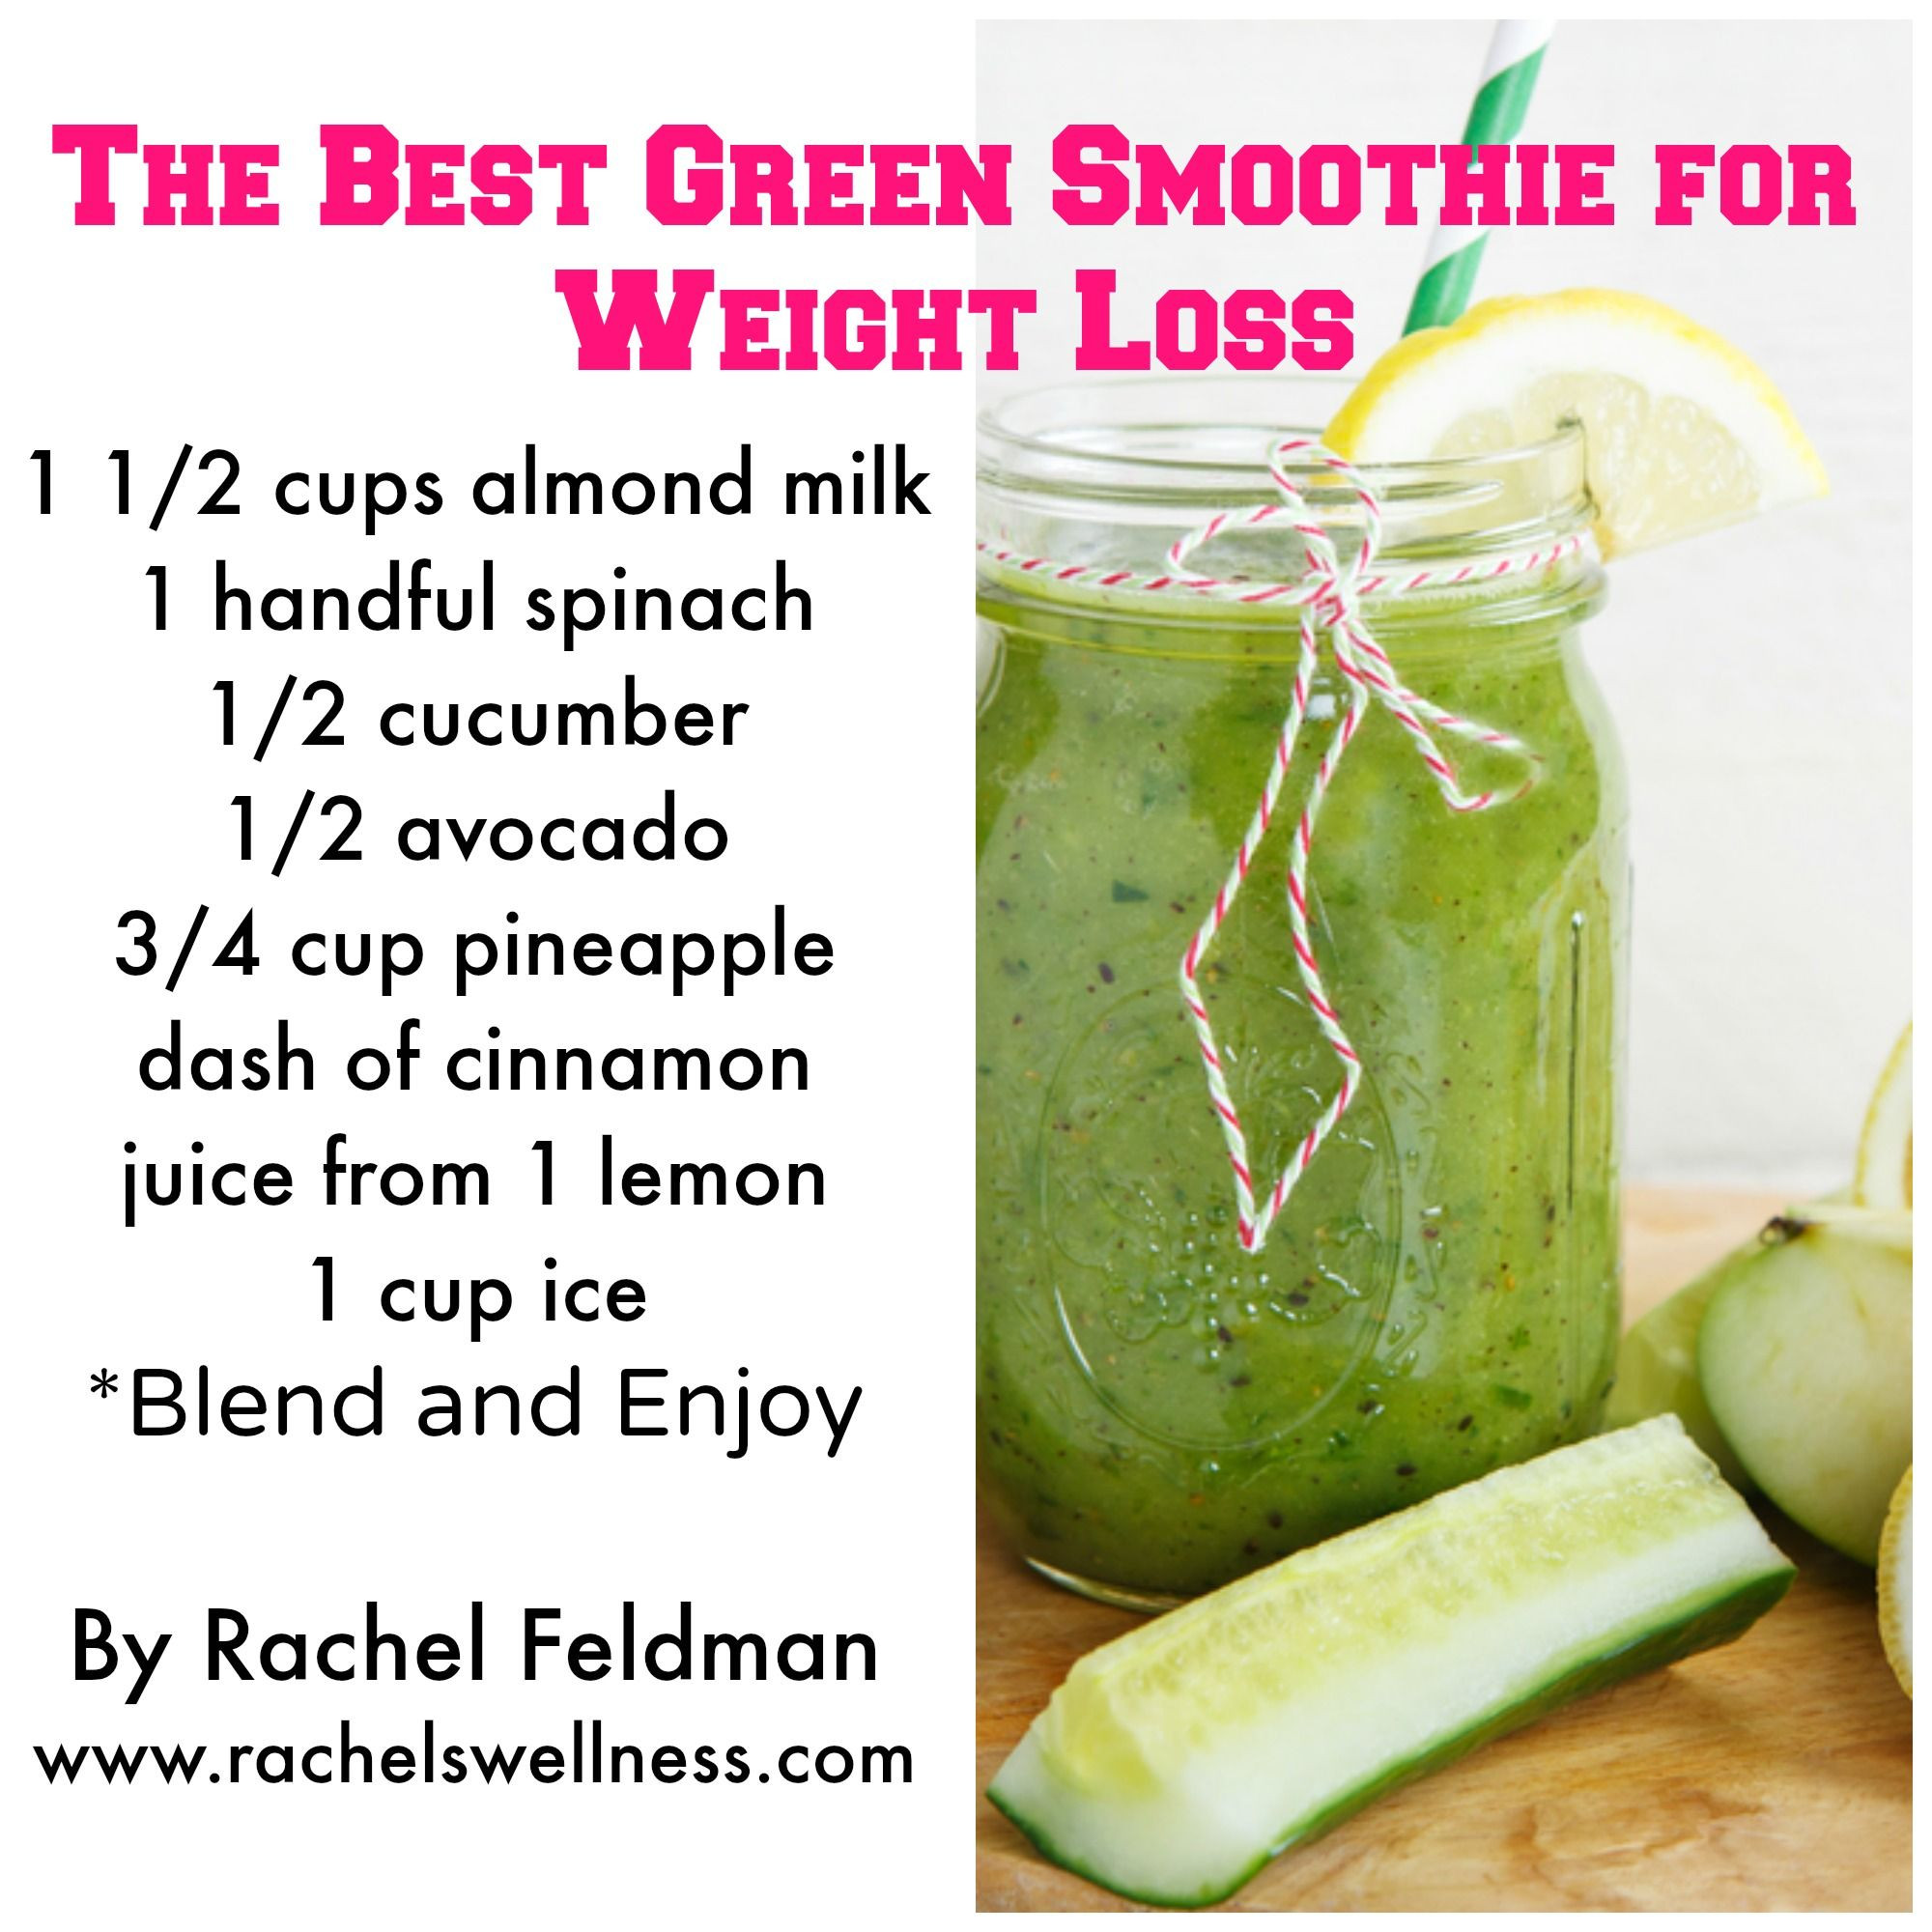 Breakfast Juice Recipes Weight Loss
 7 Healthy Green Smoothie Recipes For Weight Loss